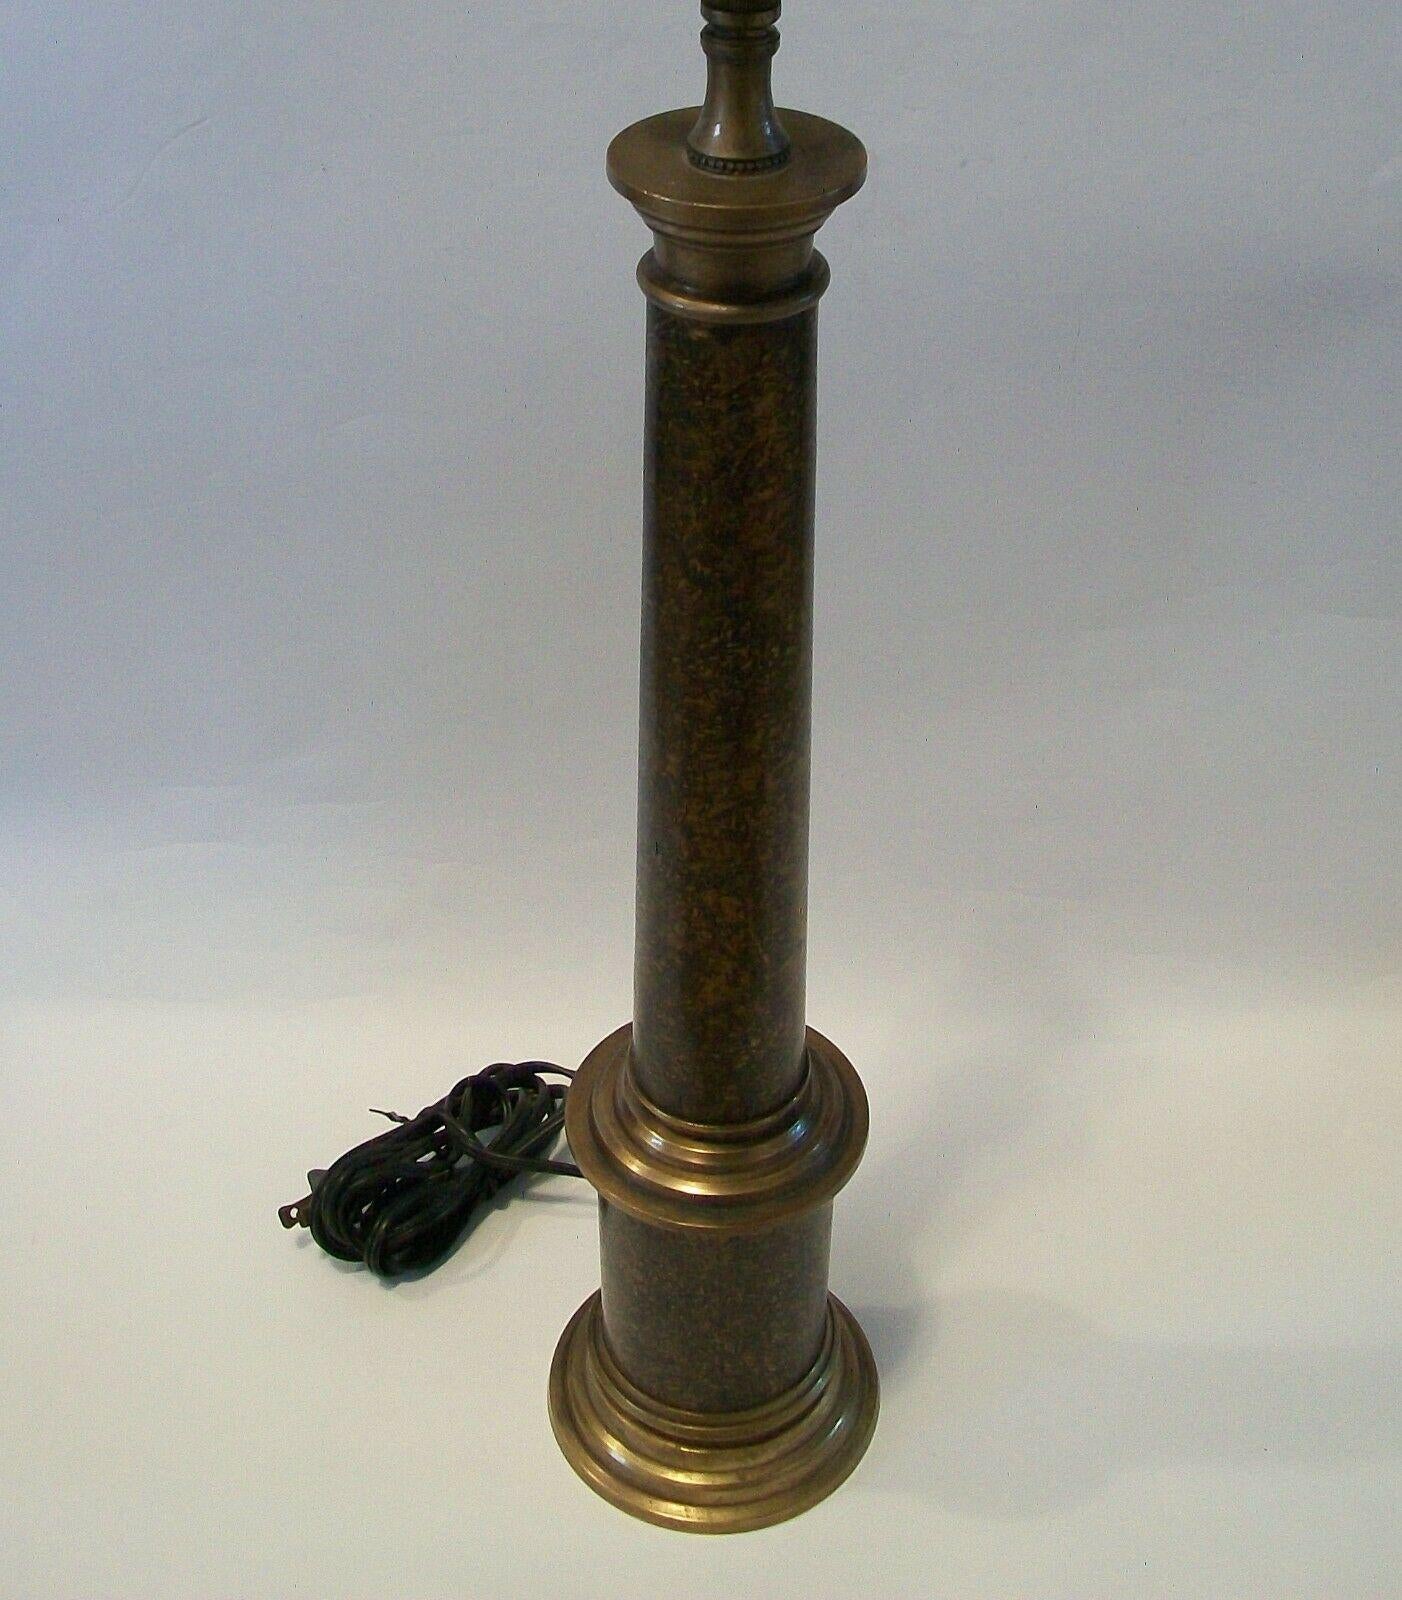 Classical style tapered bronze column table lamp - applied faux granite finish to the column and base - U.S.A. - mid 20th century.

Excellent vintage condition - tarnishing and patina to the bronze from age and use - no loss - no damage - no